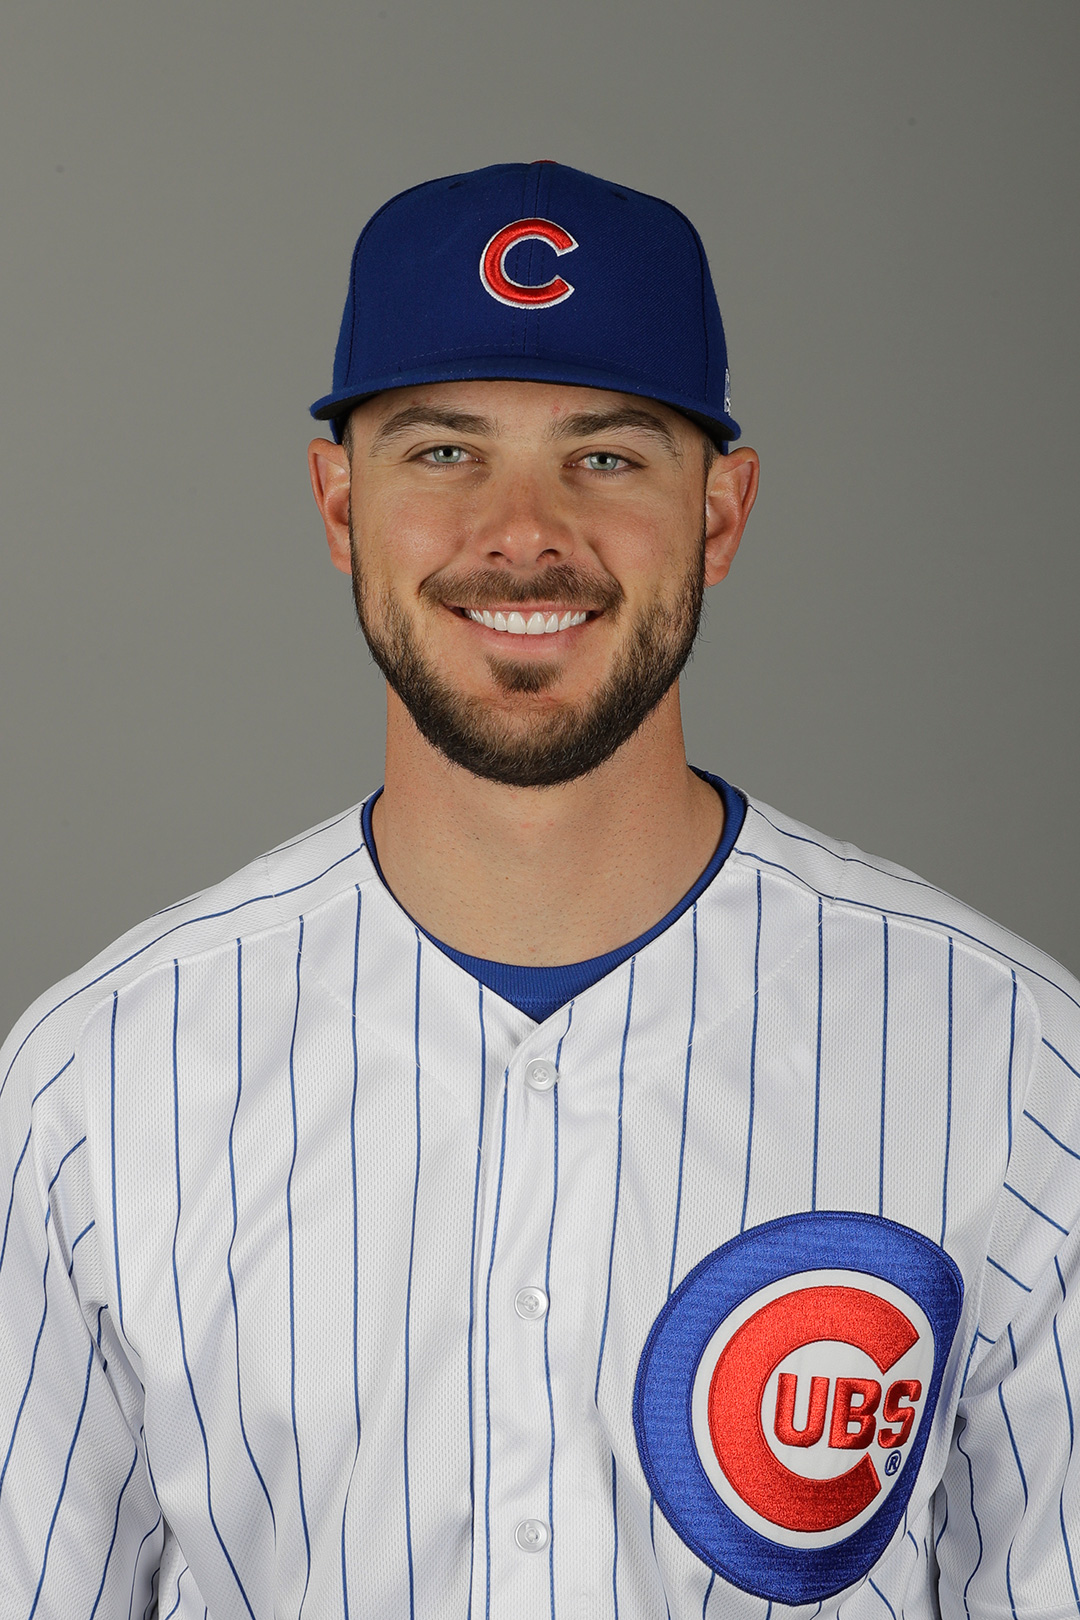 Chicago Cubs: Kris Bryant has a forgettable ASG performance